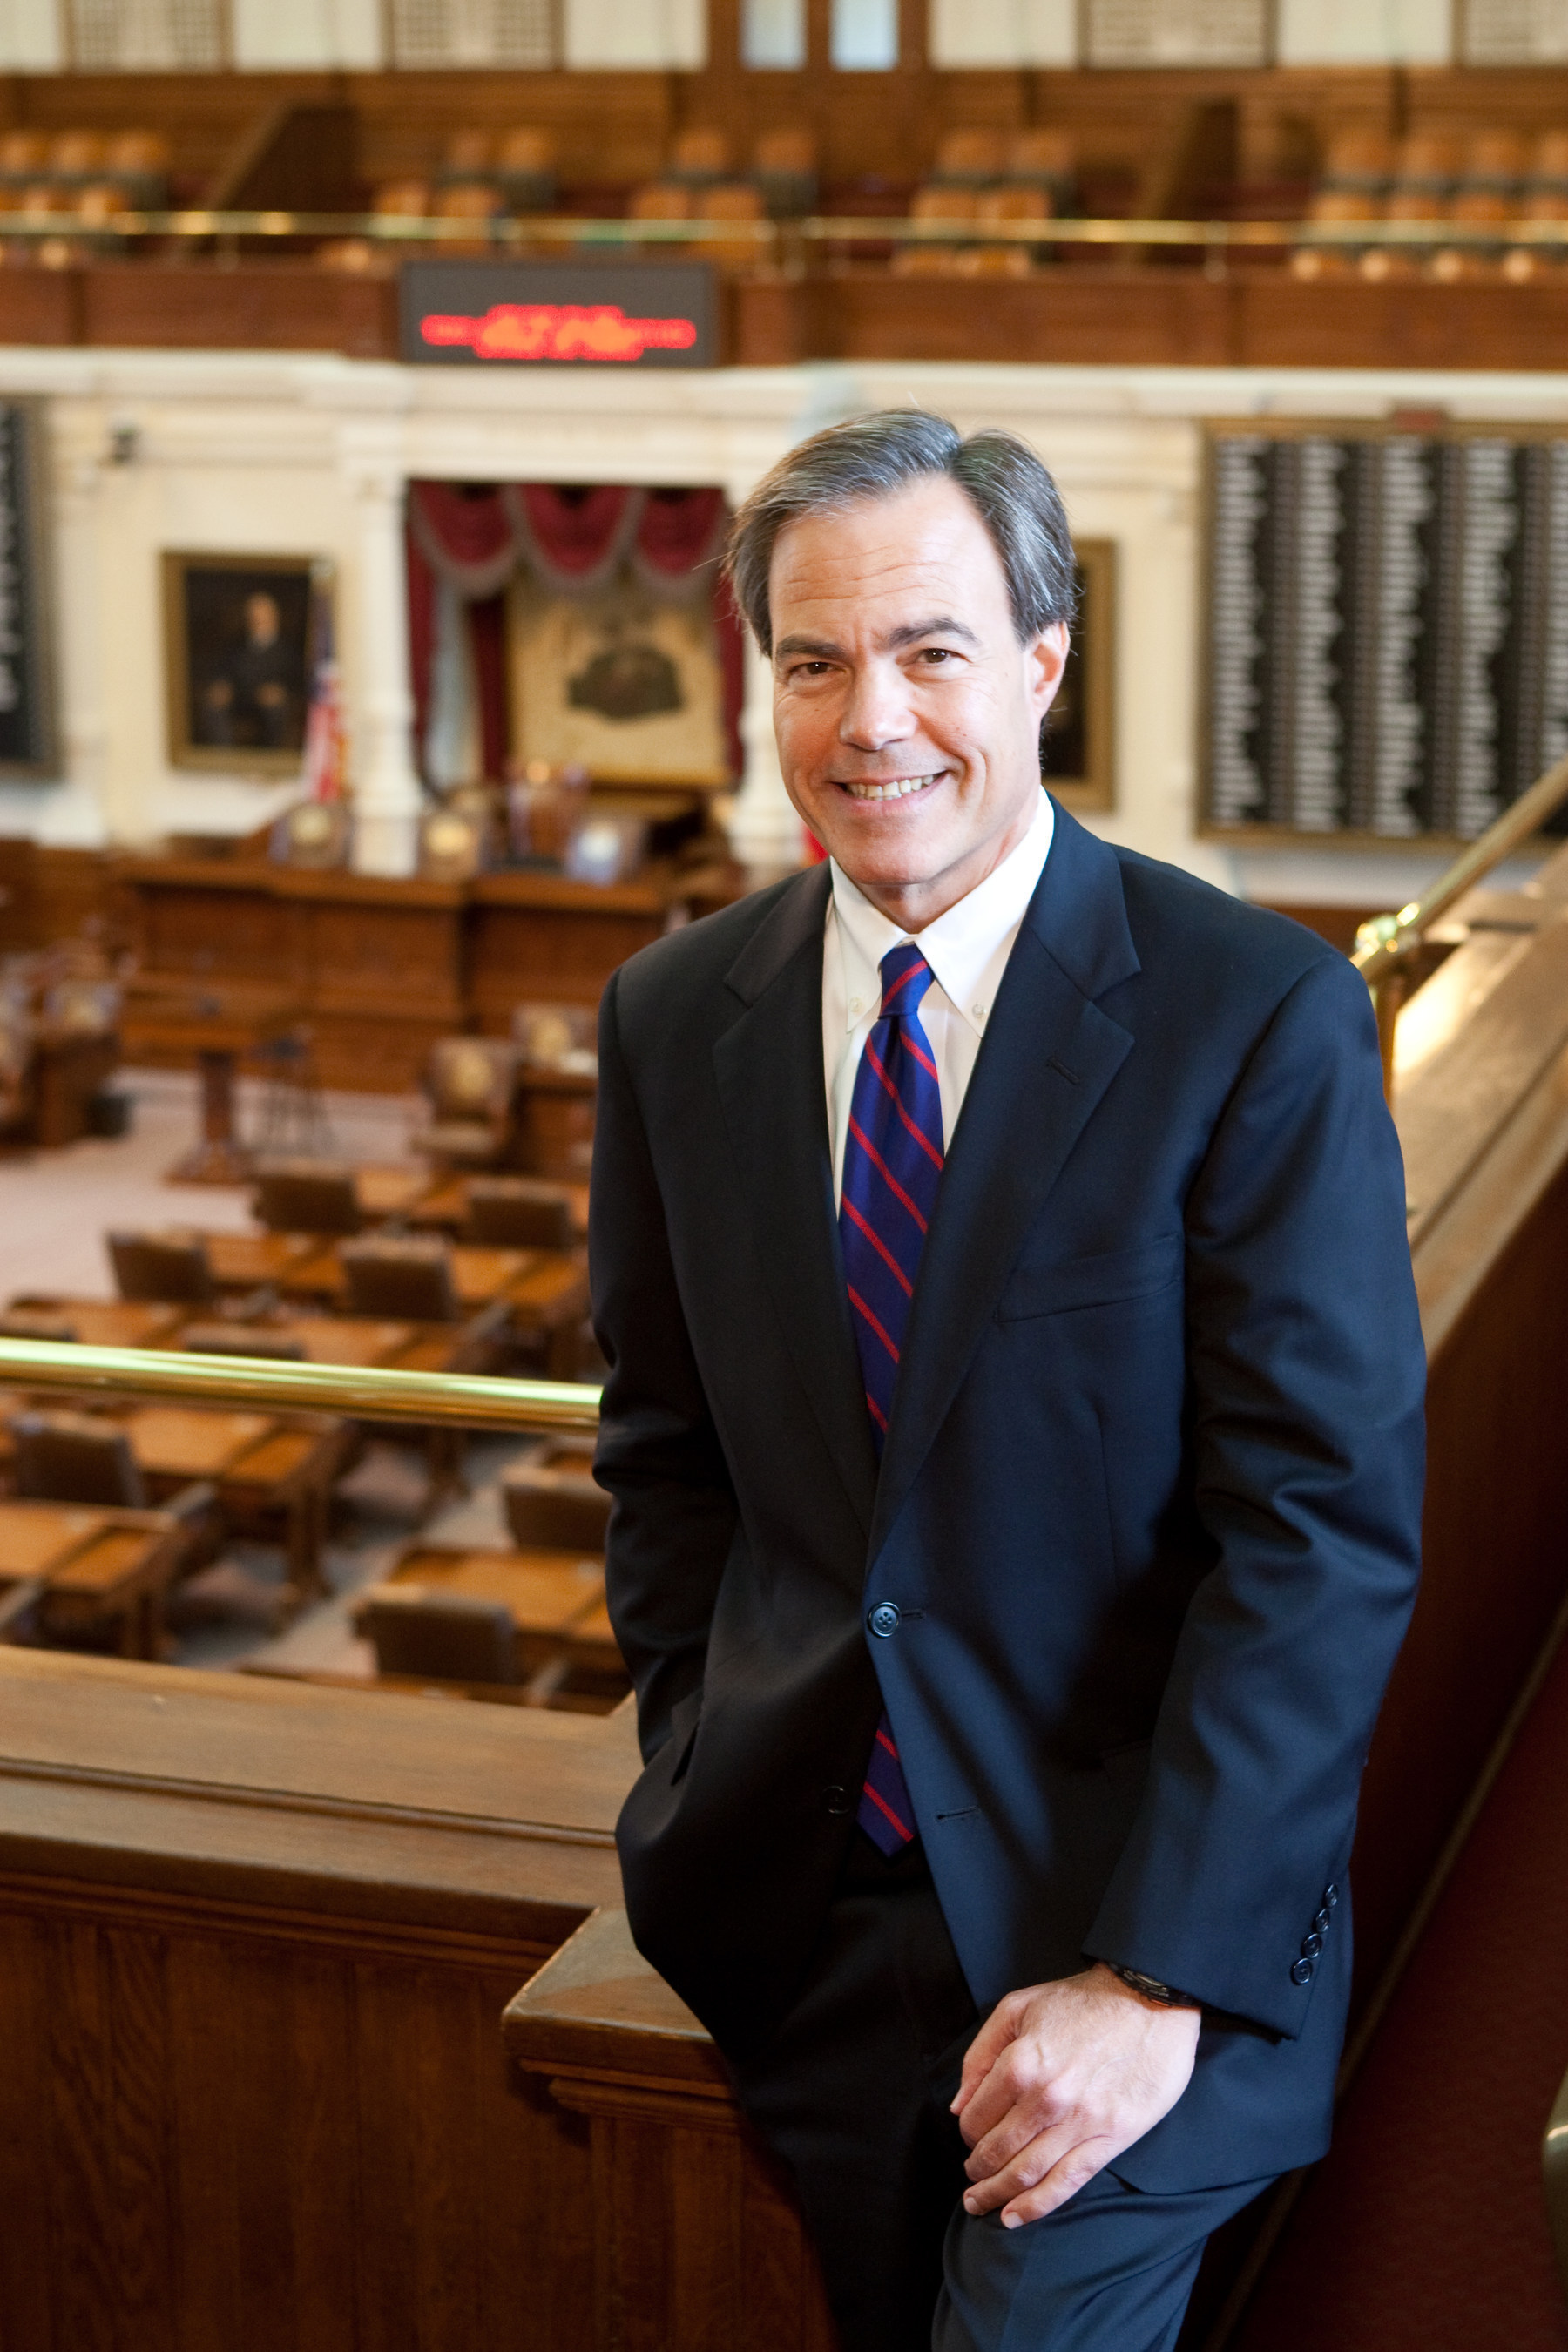 Texas Speaker of the House of Representatives Joe Straus was named the 2015 Texan of the Year by the Texas Legislative Conference. He will be honored Thursday evening, March 26, prior to the Texas Legislative Conference March 27. Conference topics include Economics of Energy Exploration, Federal Intervention and Texas Infrastructure, and Technology Impacts on Transportation. For more Information contact the Greater New Braunfels Chamber of Commerce at (830) 608-2816 or at tlc@nbcham.org.